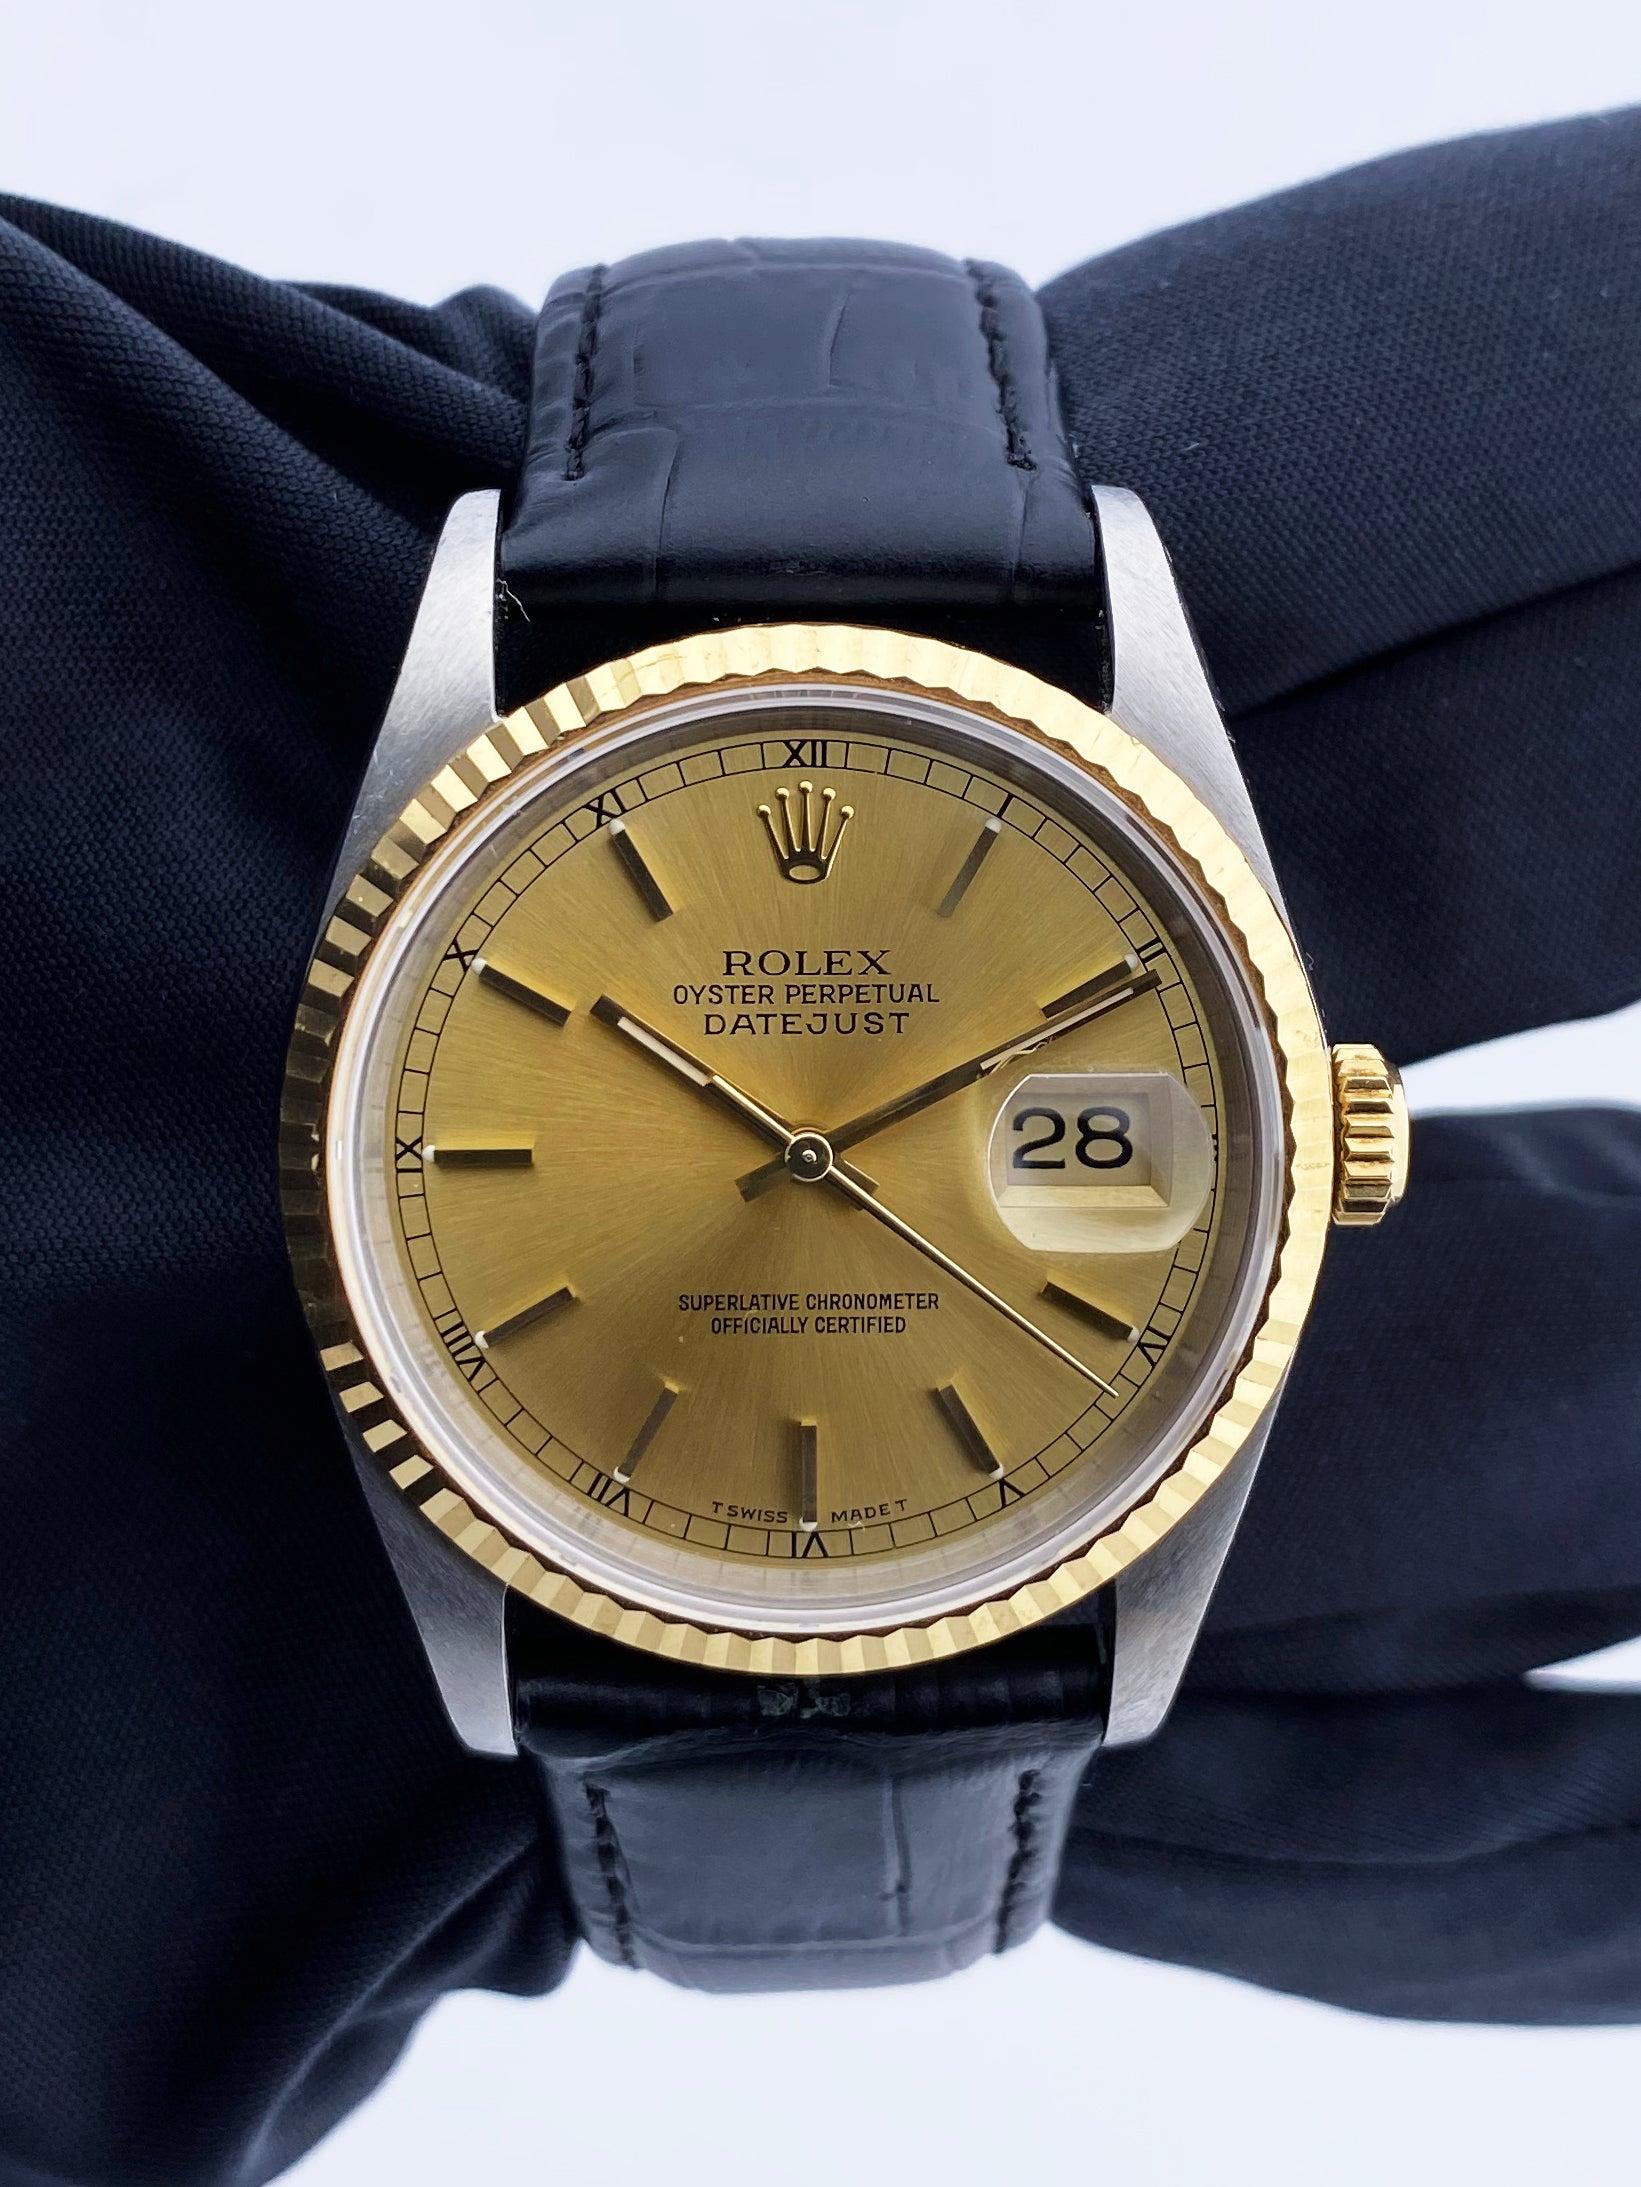 
Rolex Datejust 16233 Mens Watch. 36mm stainless steel case. 18K yellow gold fluted bezel. Champagne dial with gold hands and Index hour markers. Minute markers on the outer dial. Date display at the 3 o'clock position. Black leather strap